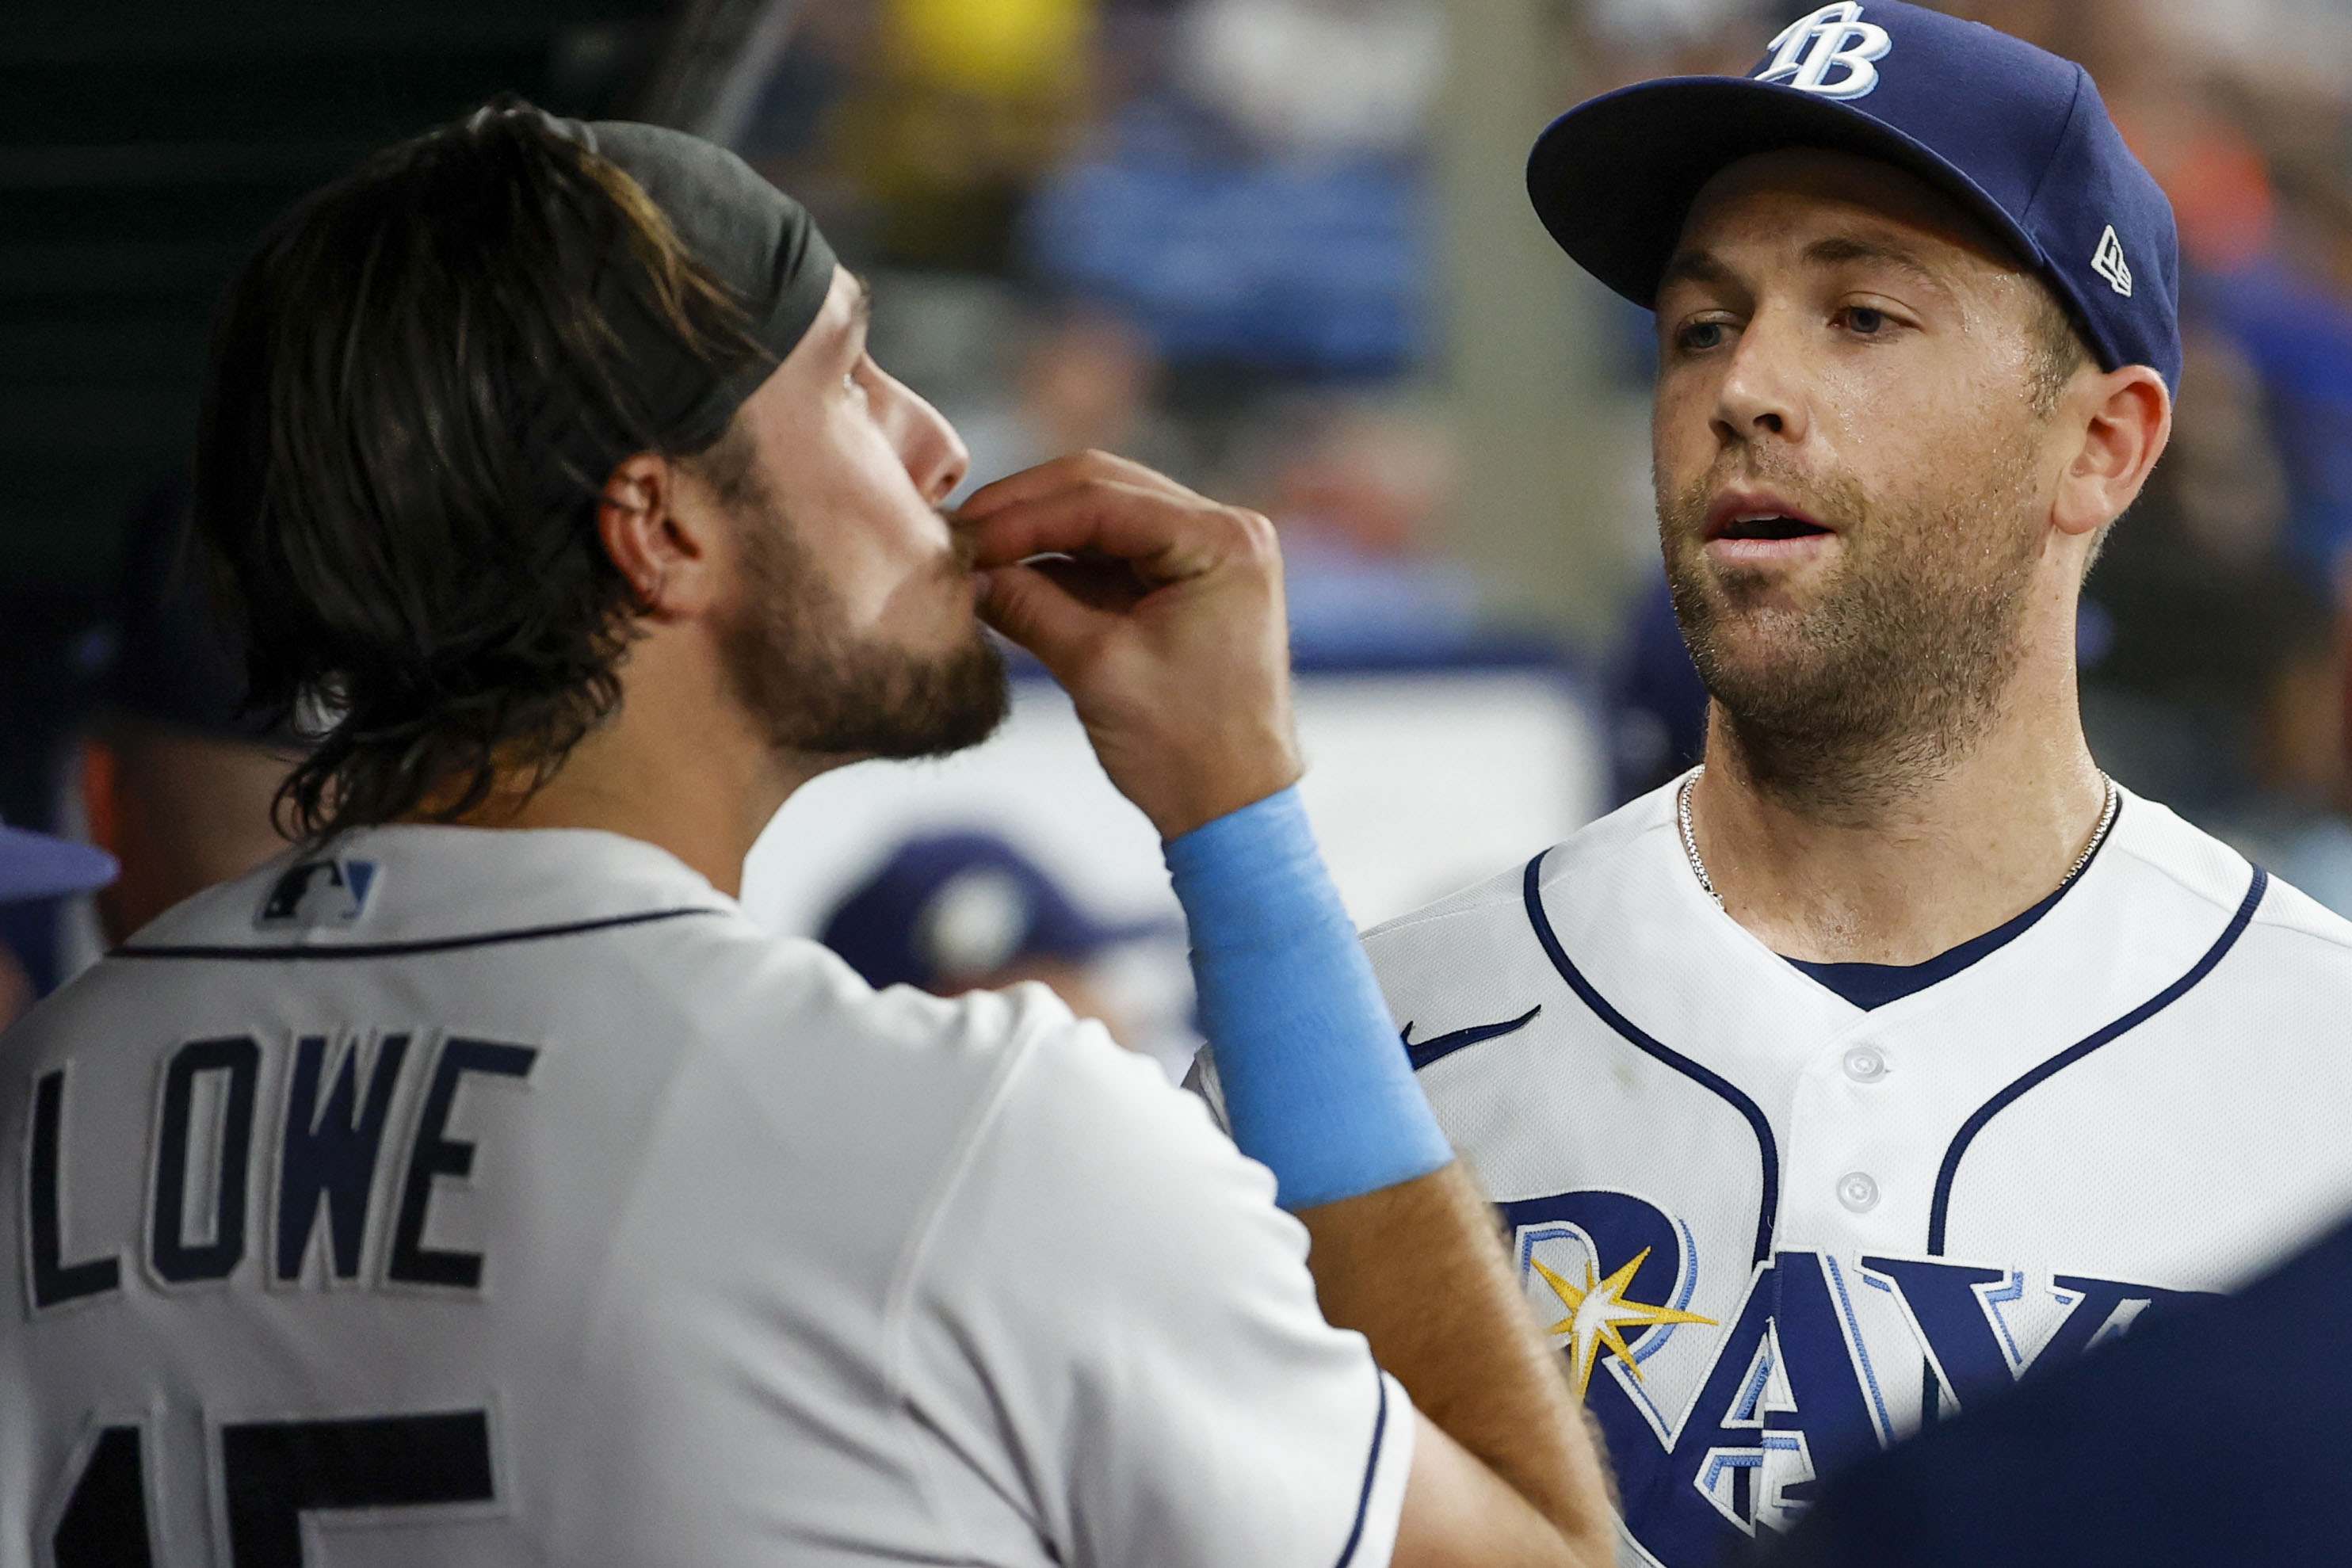 Superstitious or 'a little stitious,' Rays hope change does them good